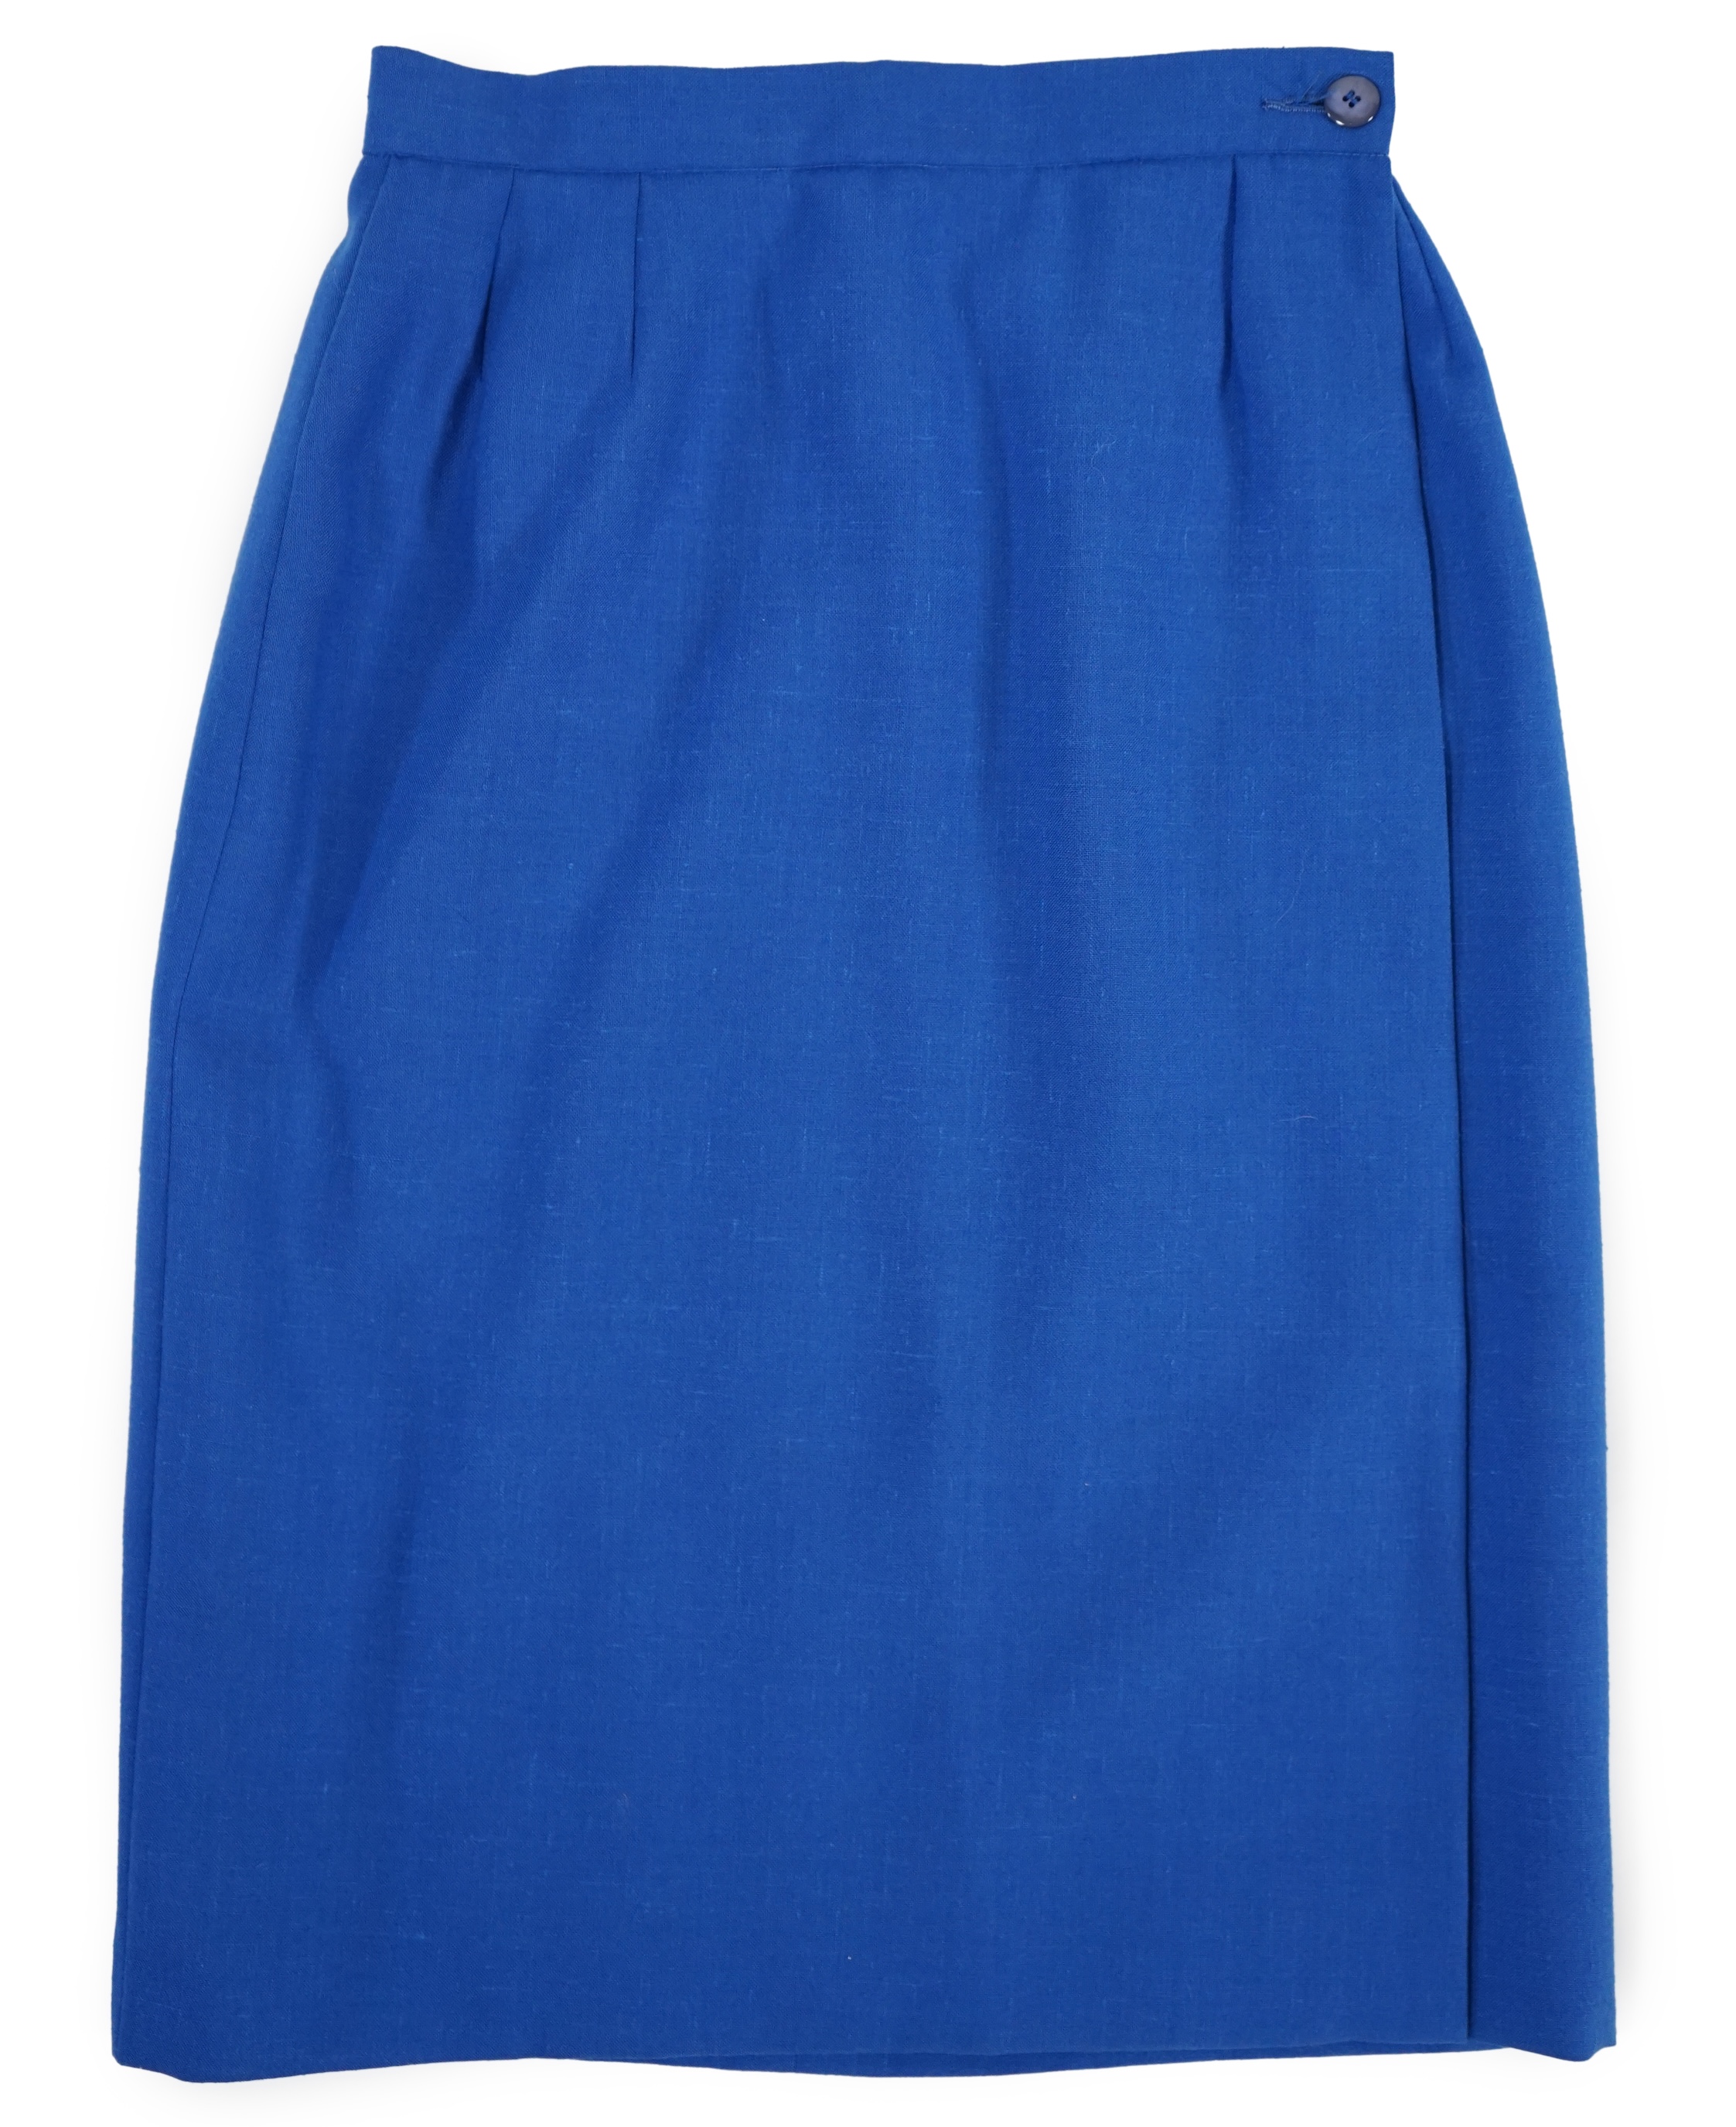 A vintage Yves Saint Laurent variation lady's royal blue wool skirt and trousers. Approx size UK 10 Please note alterations to make the waist smaller may have been carried out on some of the skirts and trousers. Proceeds